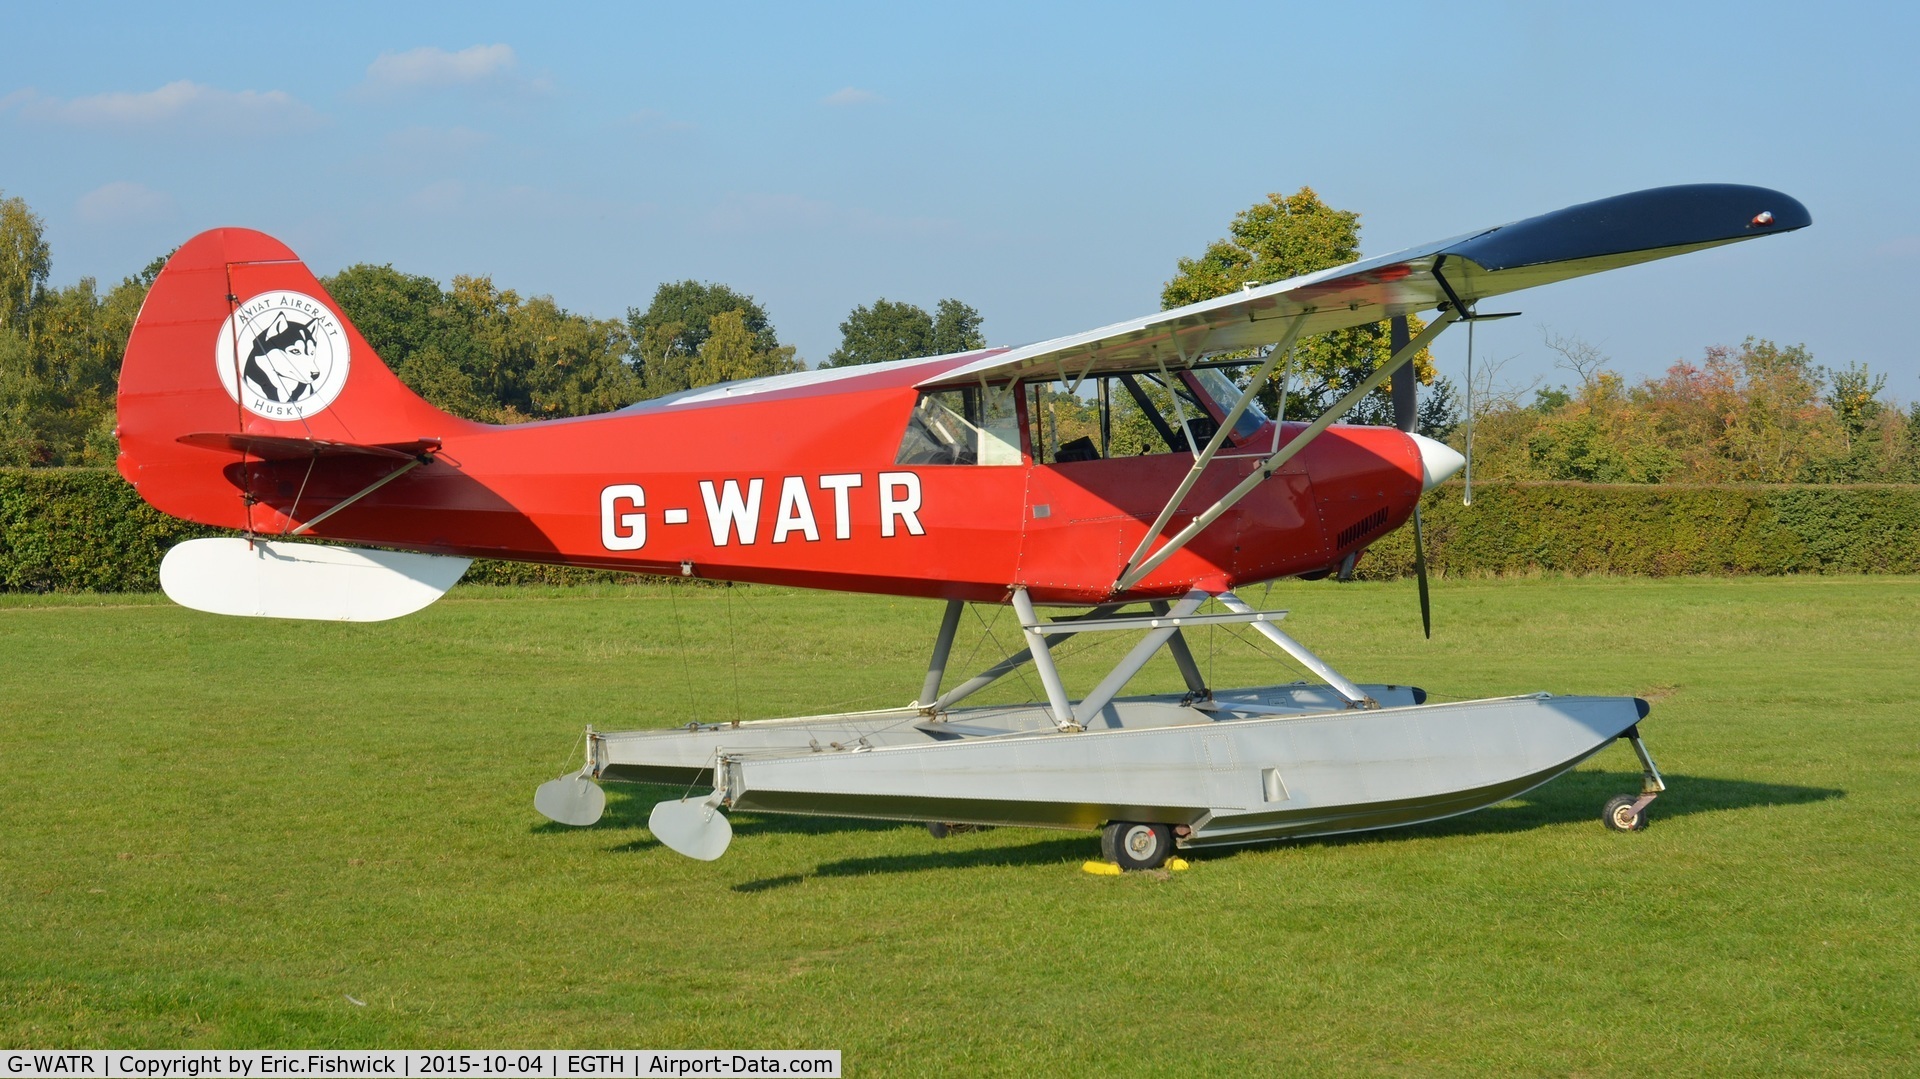 G-WATR, 1988 Christen A-1 Husky C/N 1040, 2, G-WATR at The Shuttleworth 'Uncovered' Airshow (Finale,) Oct. 2015.